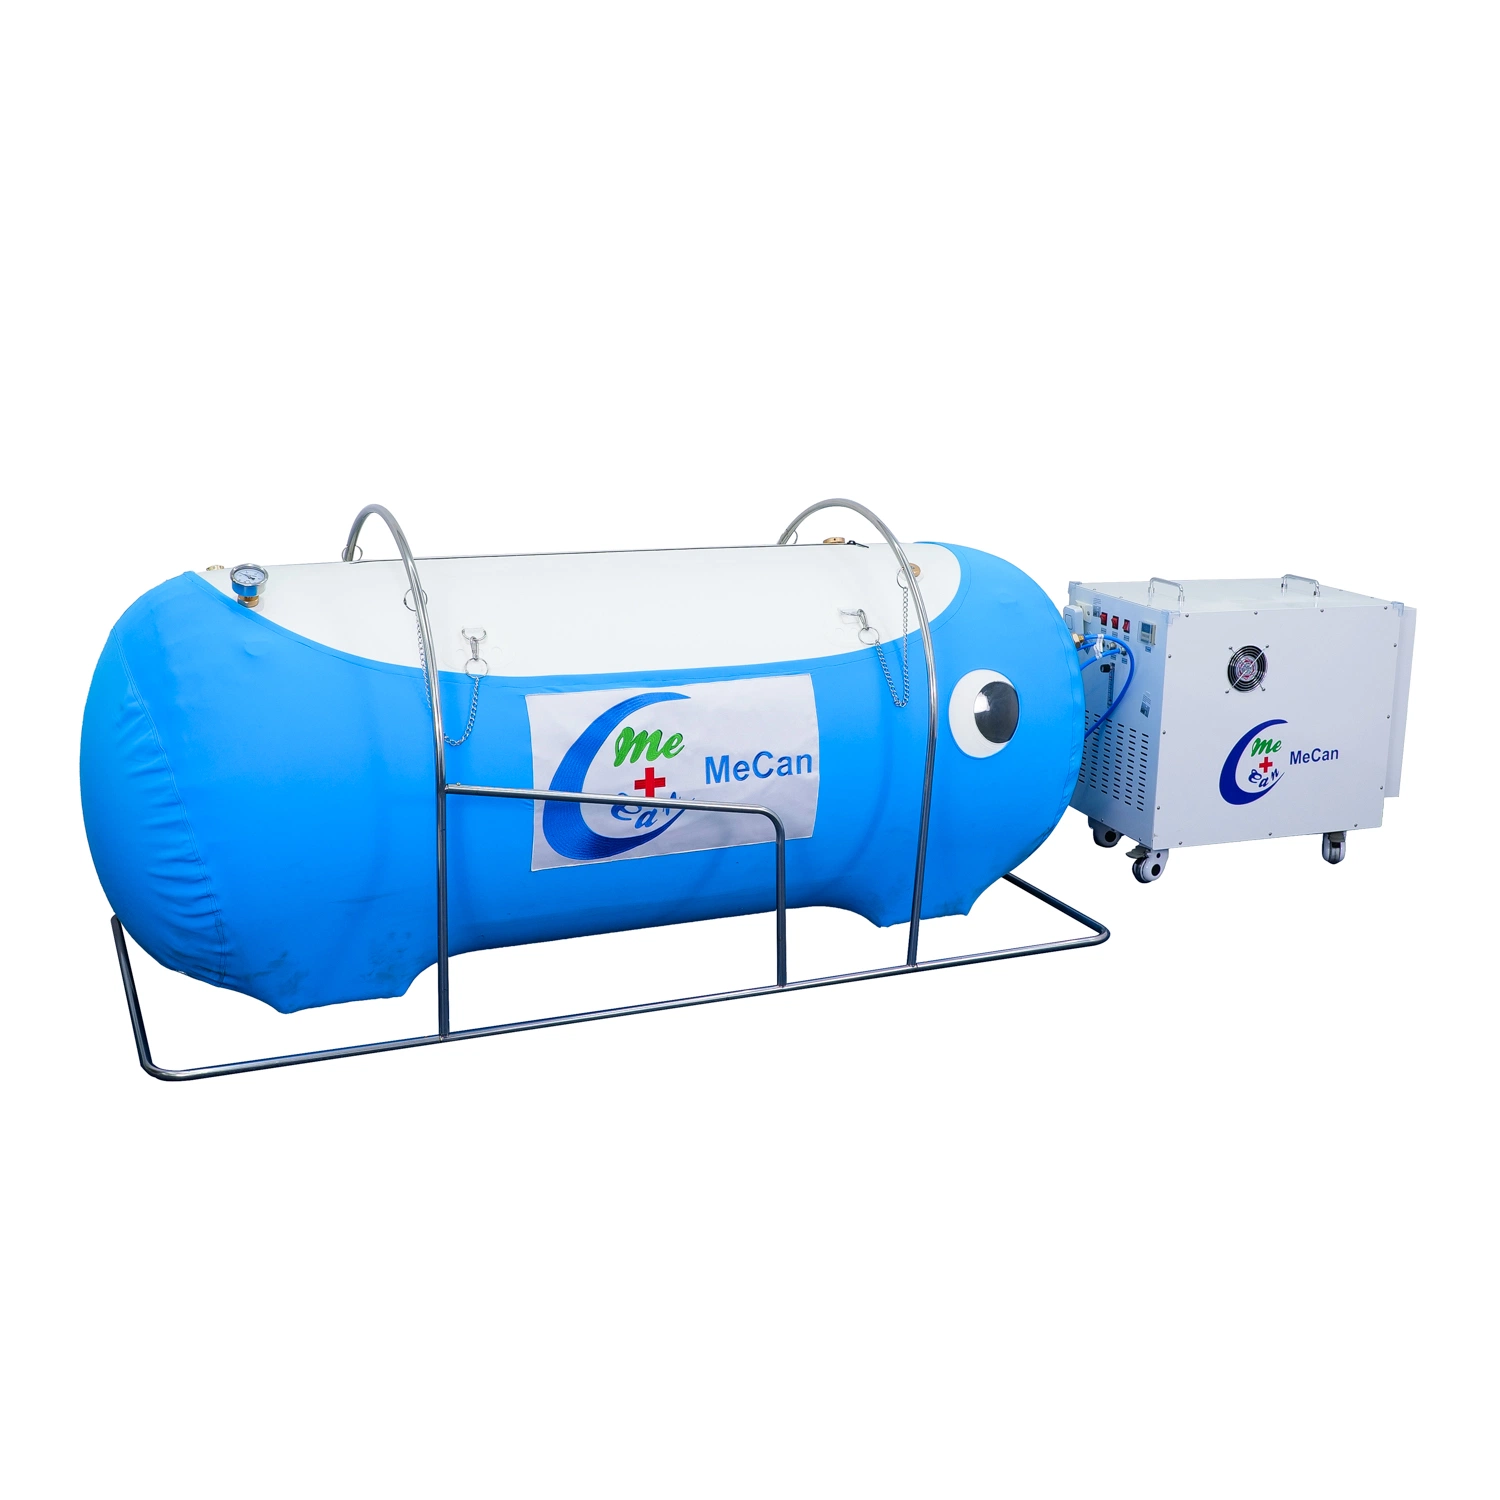 Home Use Beauty Salon Equipment Hyperbaric Oxygen Chamber 4 People Hbot Chambers